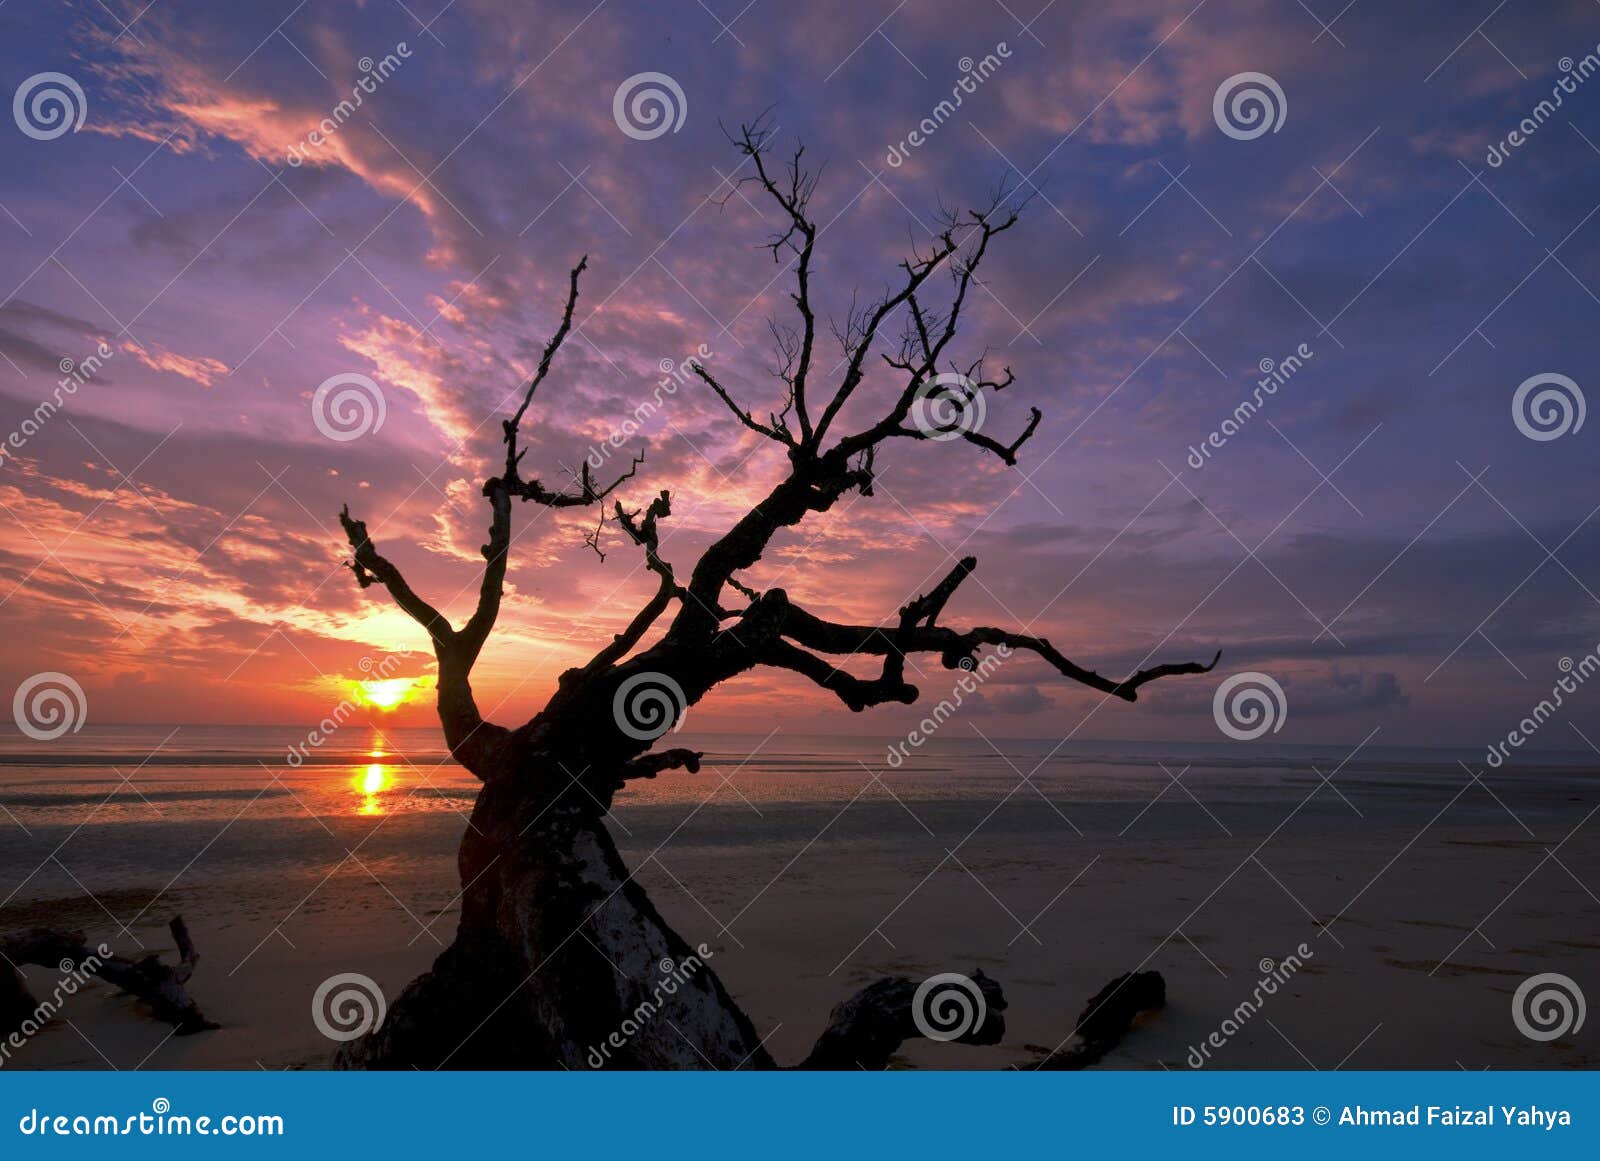 Dead Branches Against Dramatic Sunrise. Stock Image - Image of dead